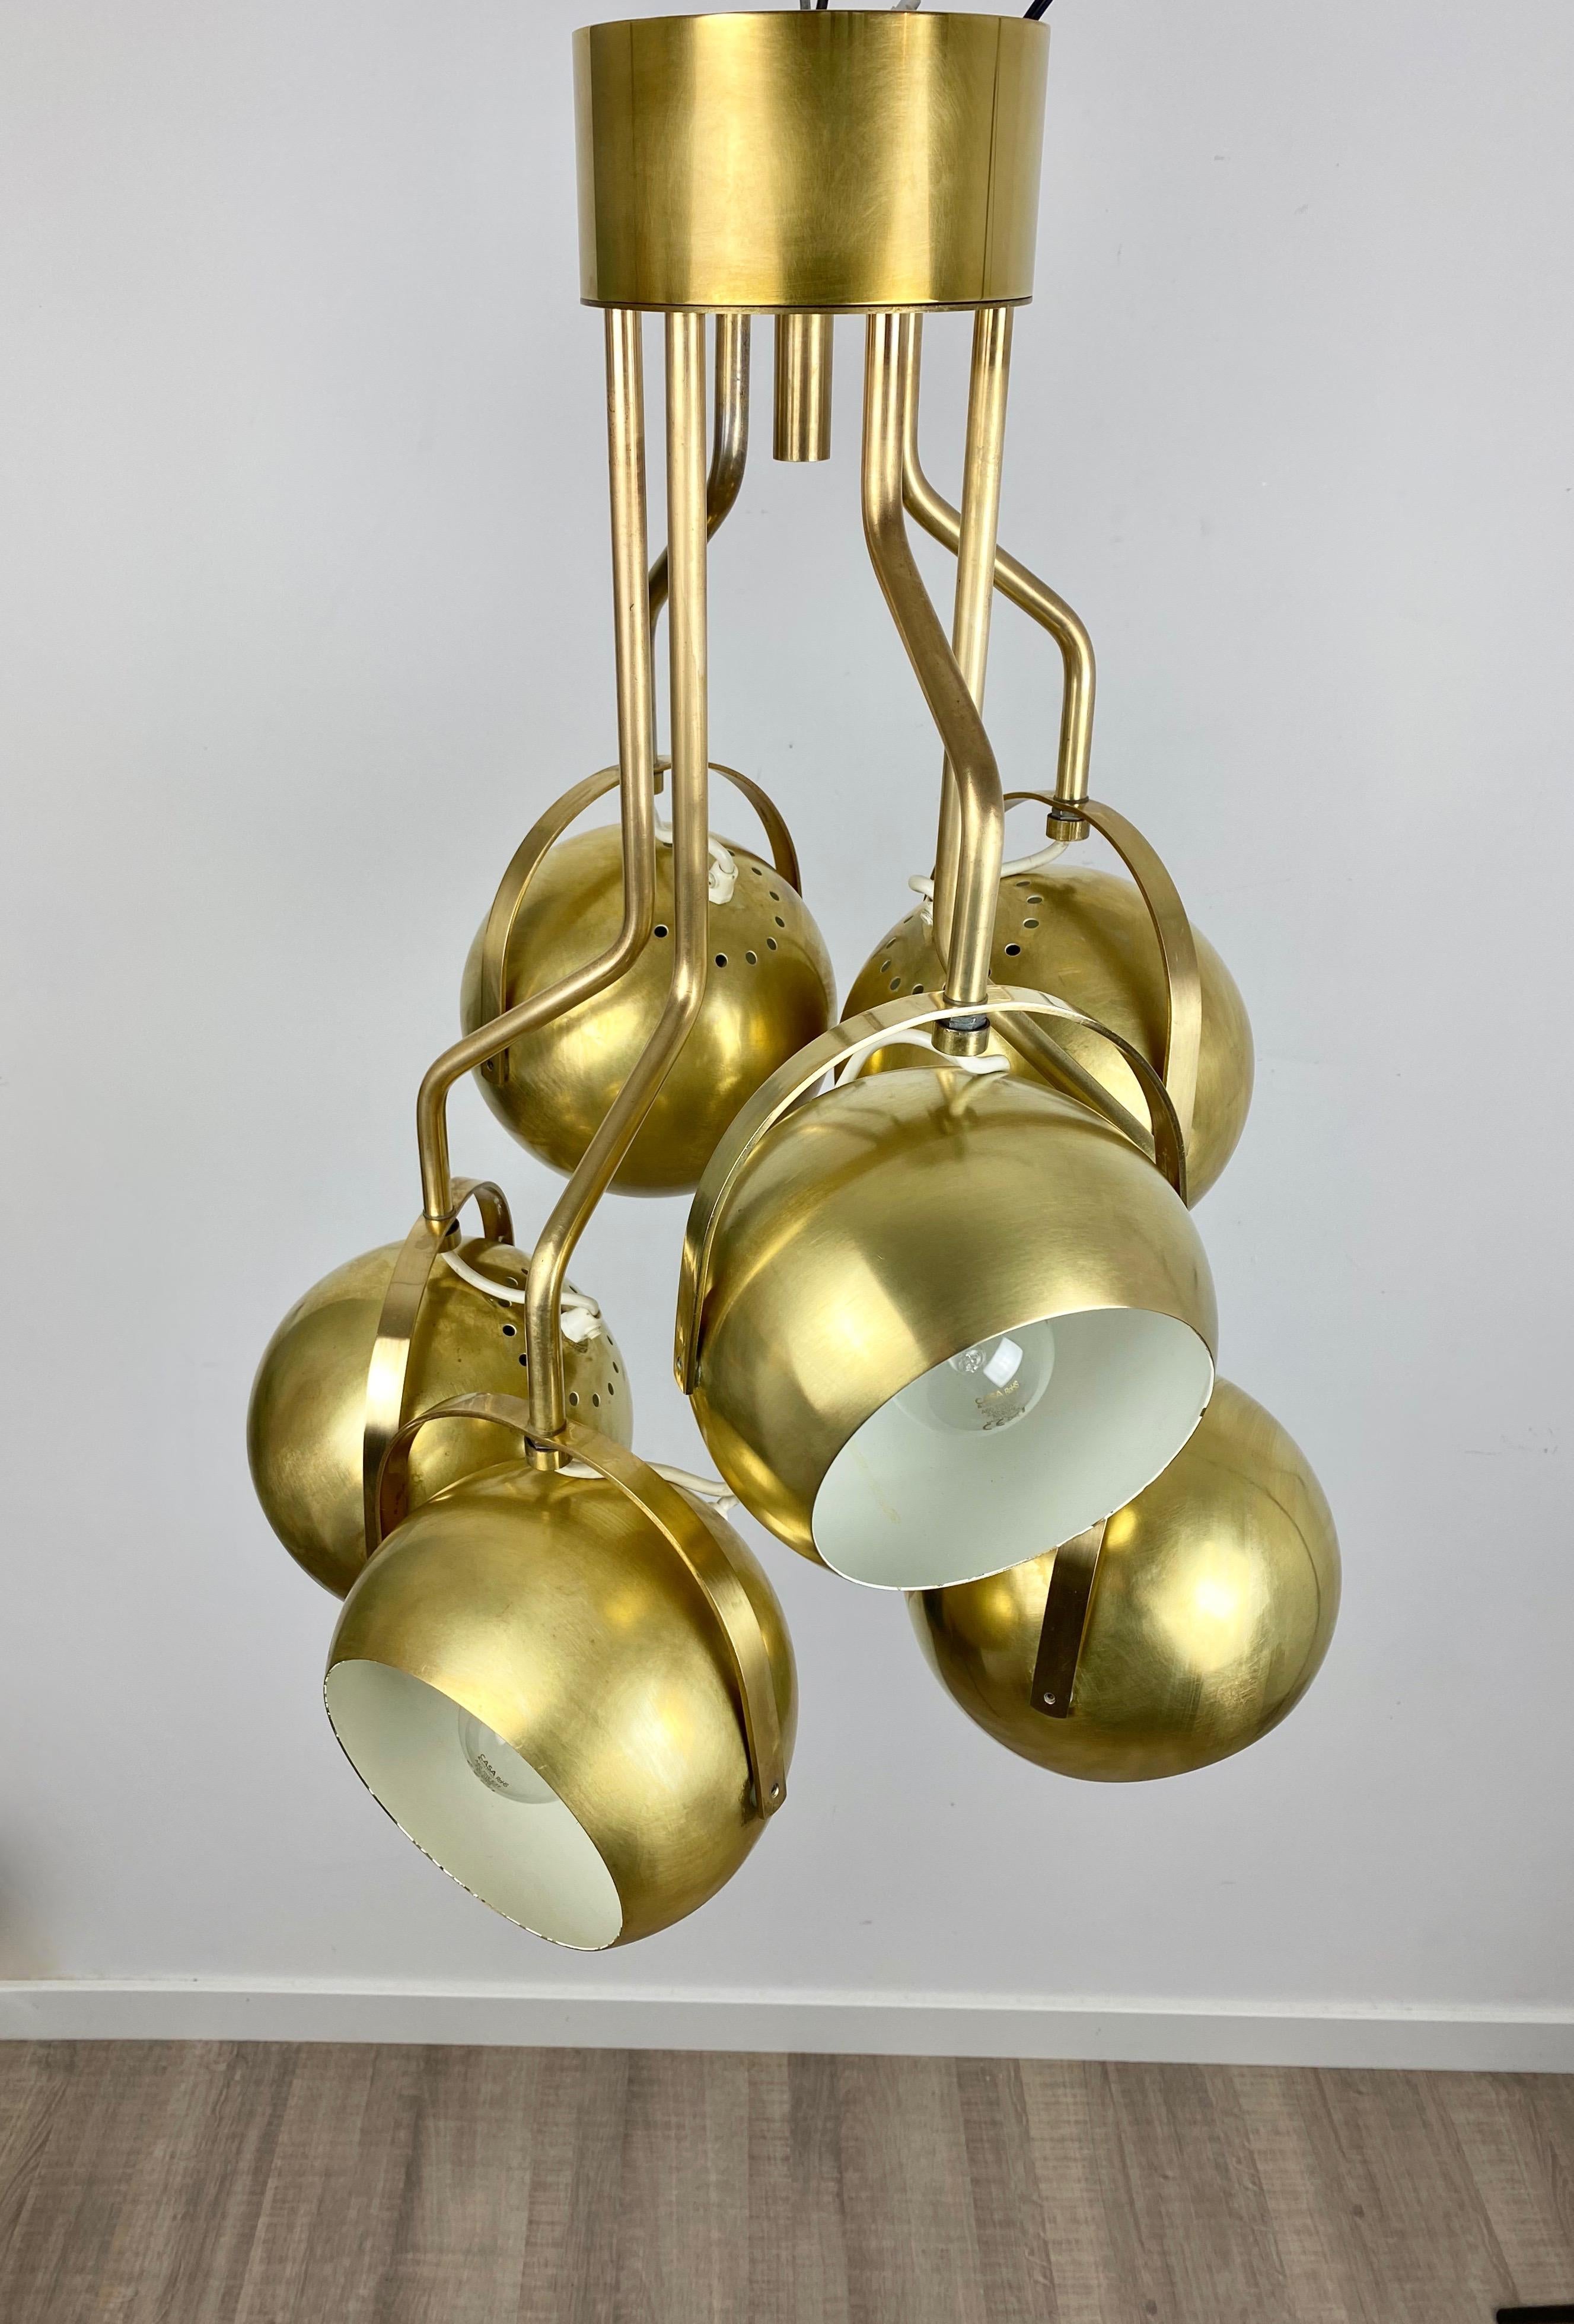 Six-light chandelier in brass by the Italian designer Goffredo Reggiani. The lights direction is adjustable. Made in Italy circa 1960.